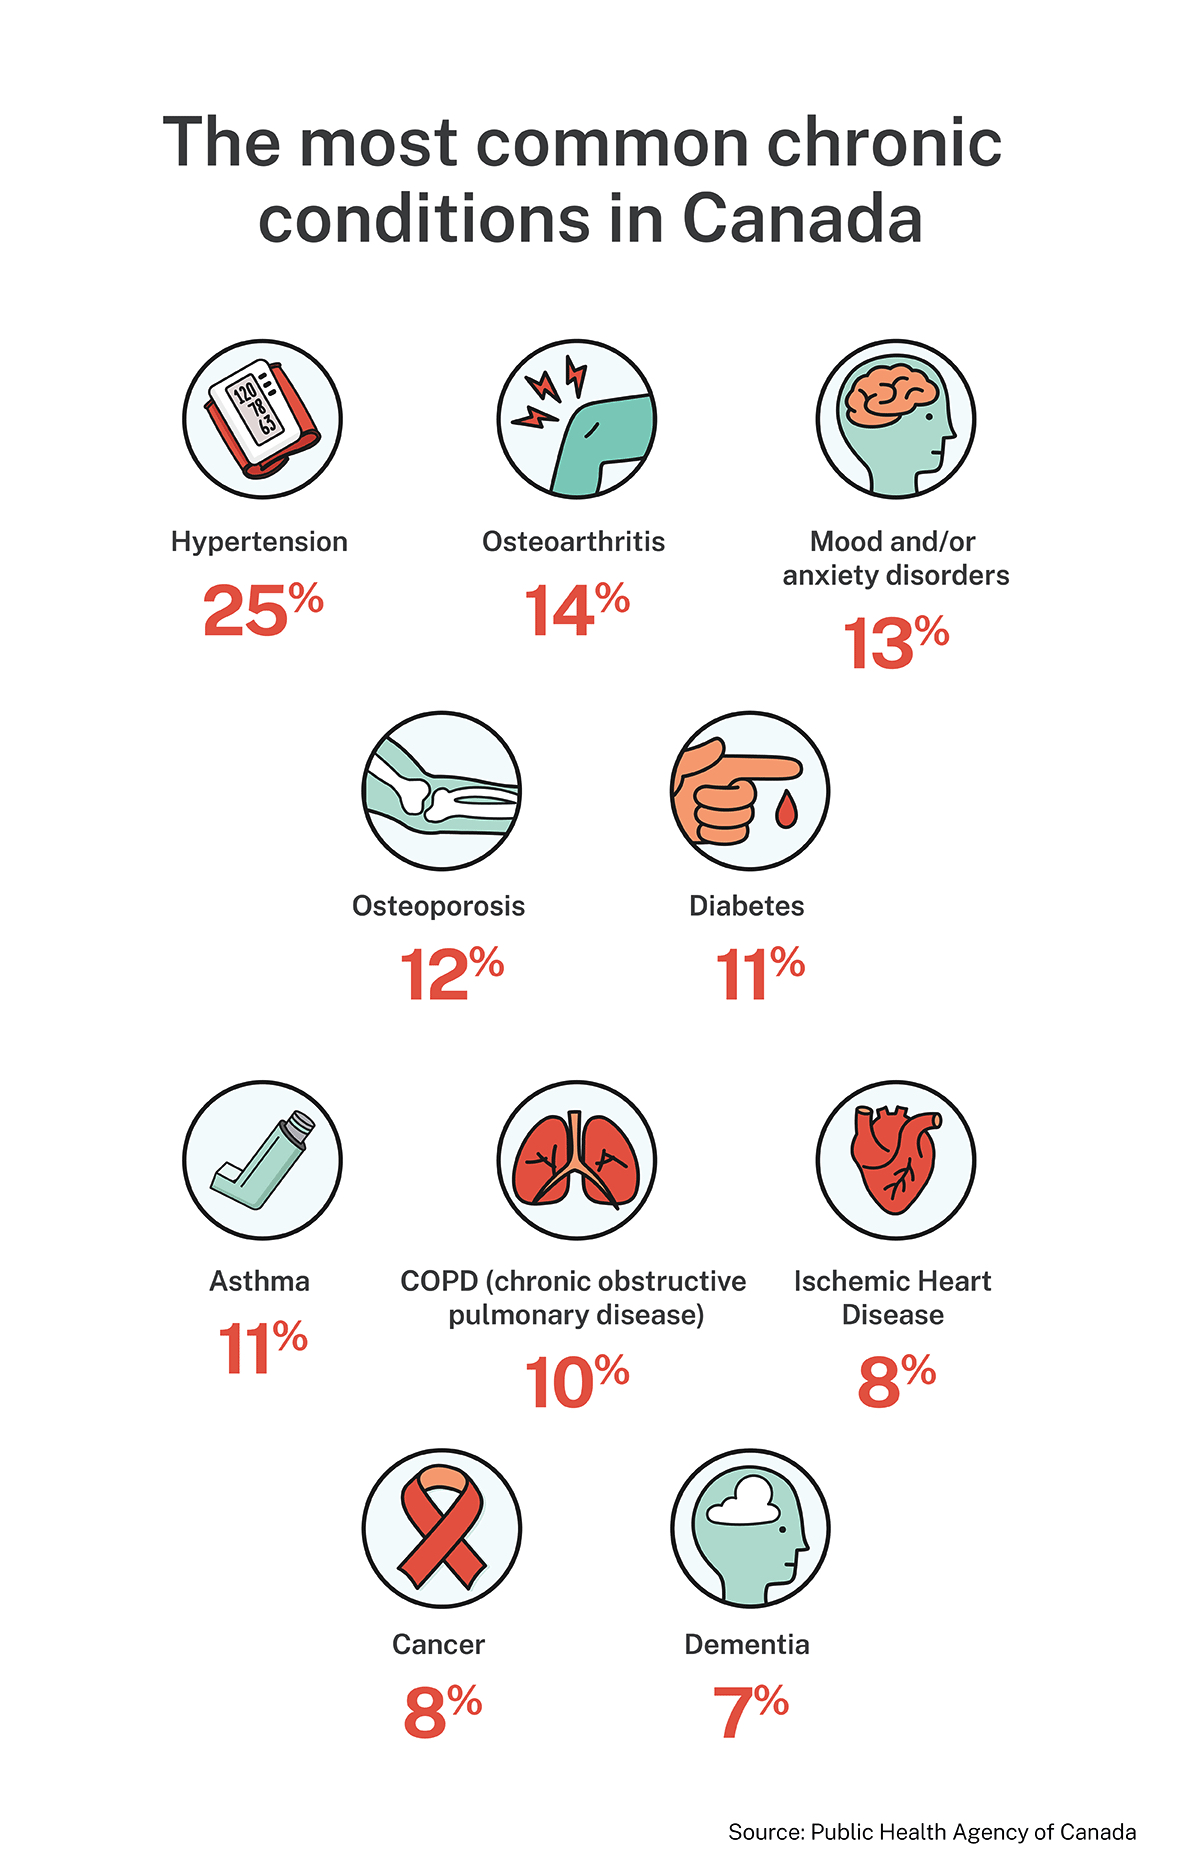 Infograph of the most common chronic conditions in Canada. Hypertension 25% Osteoarthritis 14% Mood and/or anxiety disorders 13% Osteoporosis 12% Diabetes 11% Asthma 11% COPD (chronic obstructive pulmonary disease) 10% Ischemic Heart Disease 8% Cancer 8% Dementia 7%